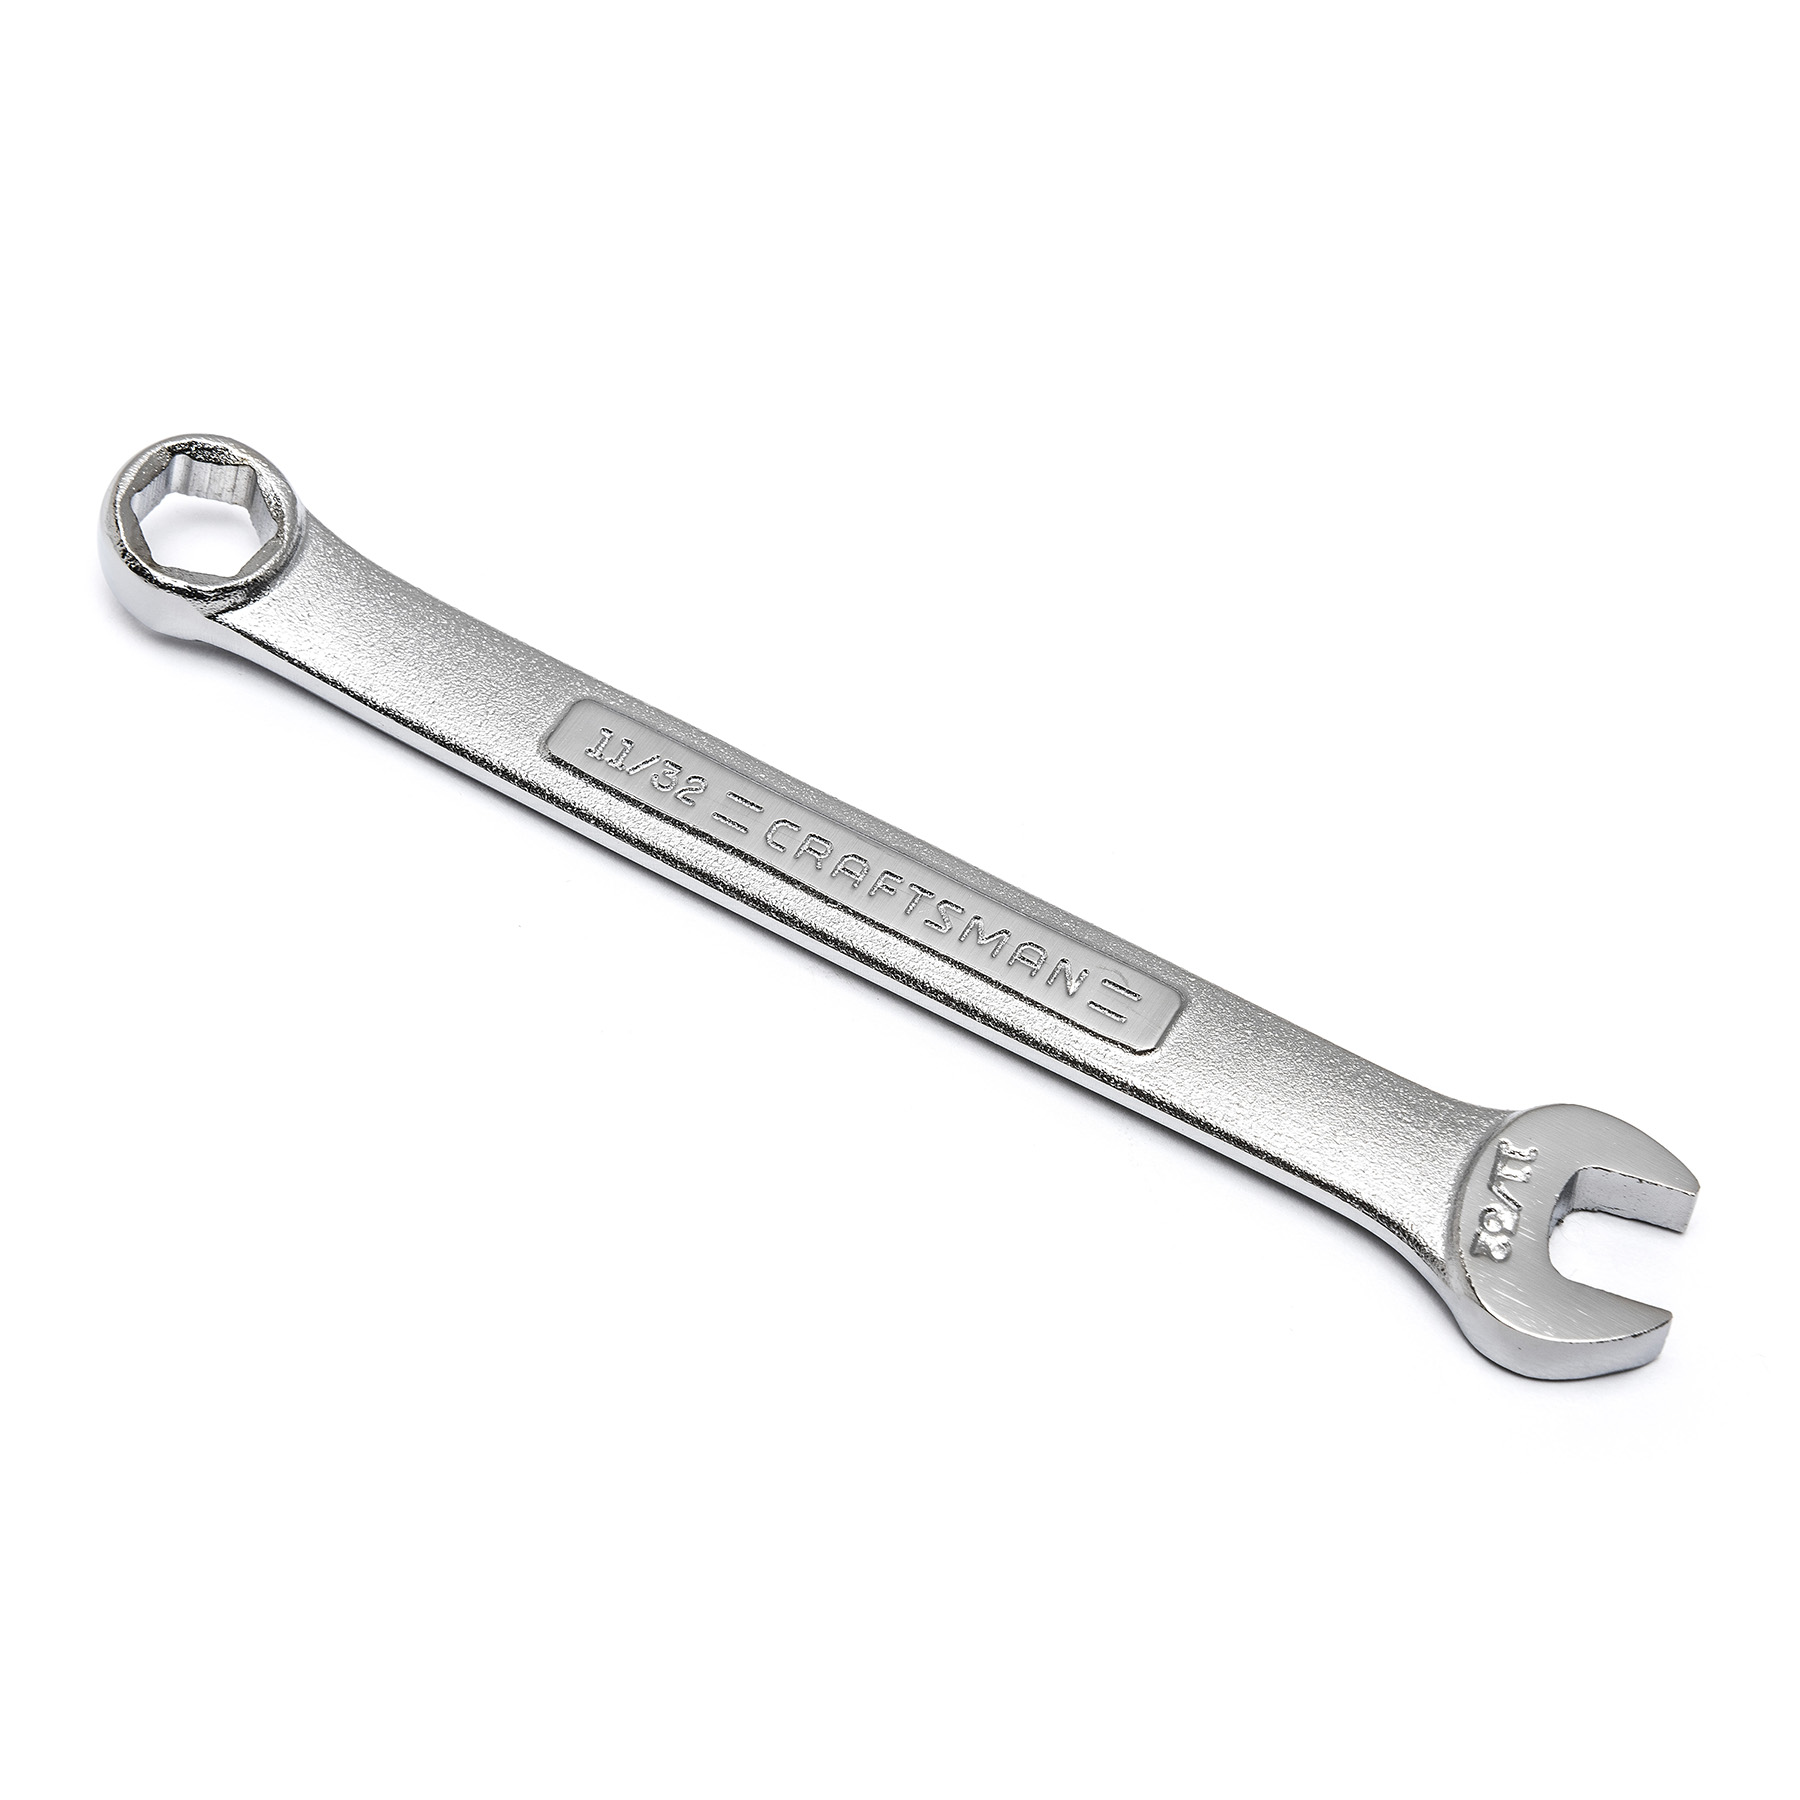 Craftsman 11/32" 6 Point Combination Wrench